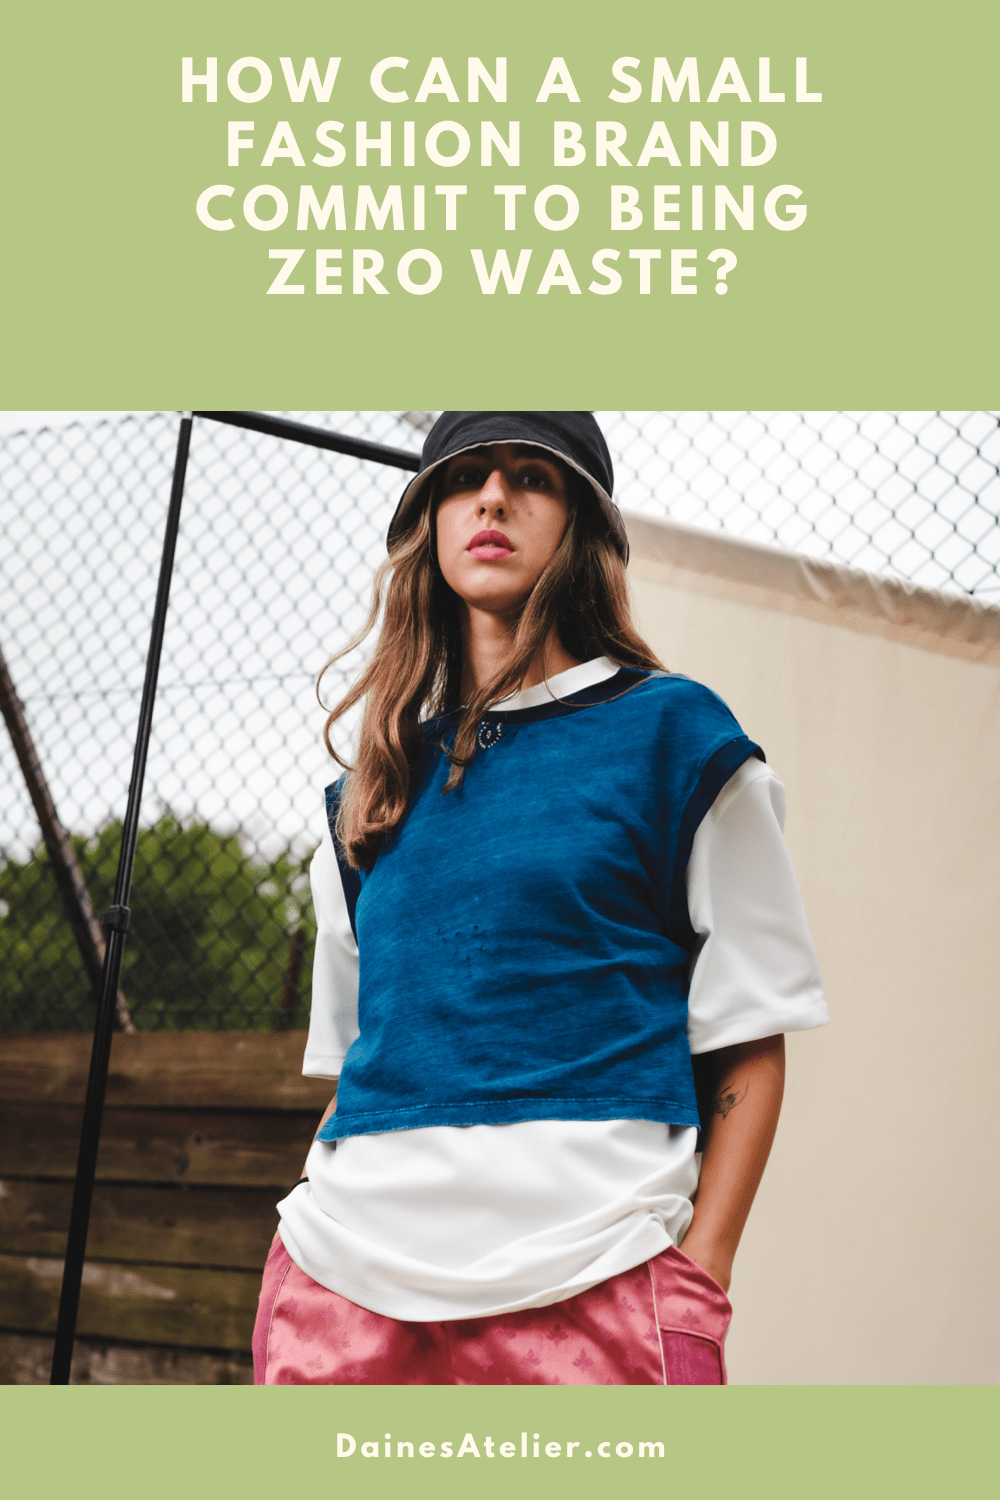 How can a small fashion brand commit to being zero waste with model wearing best. T shirt and bucket hat